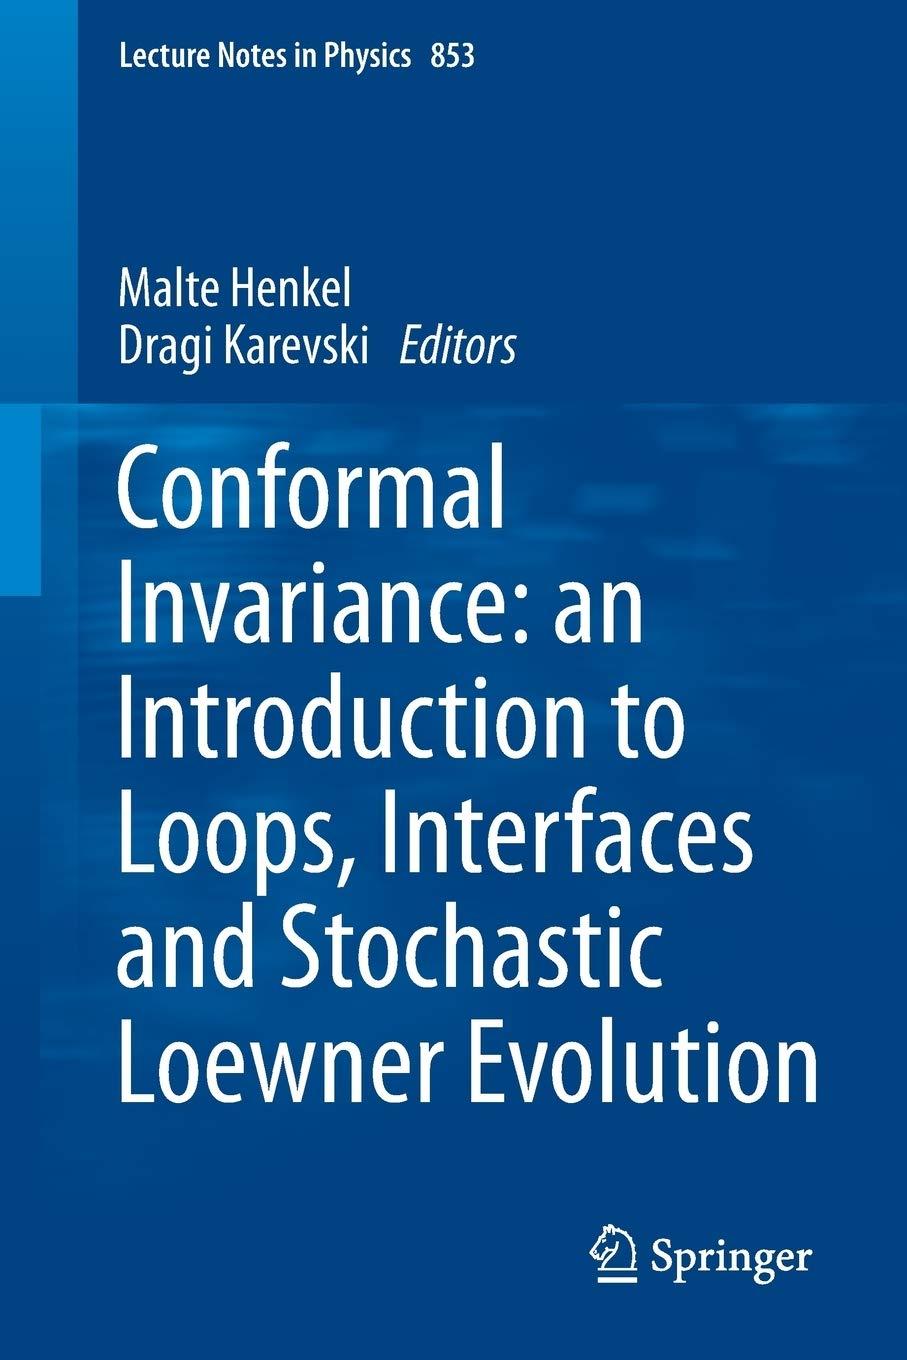 conformal invariance an introduction to loops interfaces and stochastic loewner evolution 1st edition malte